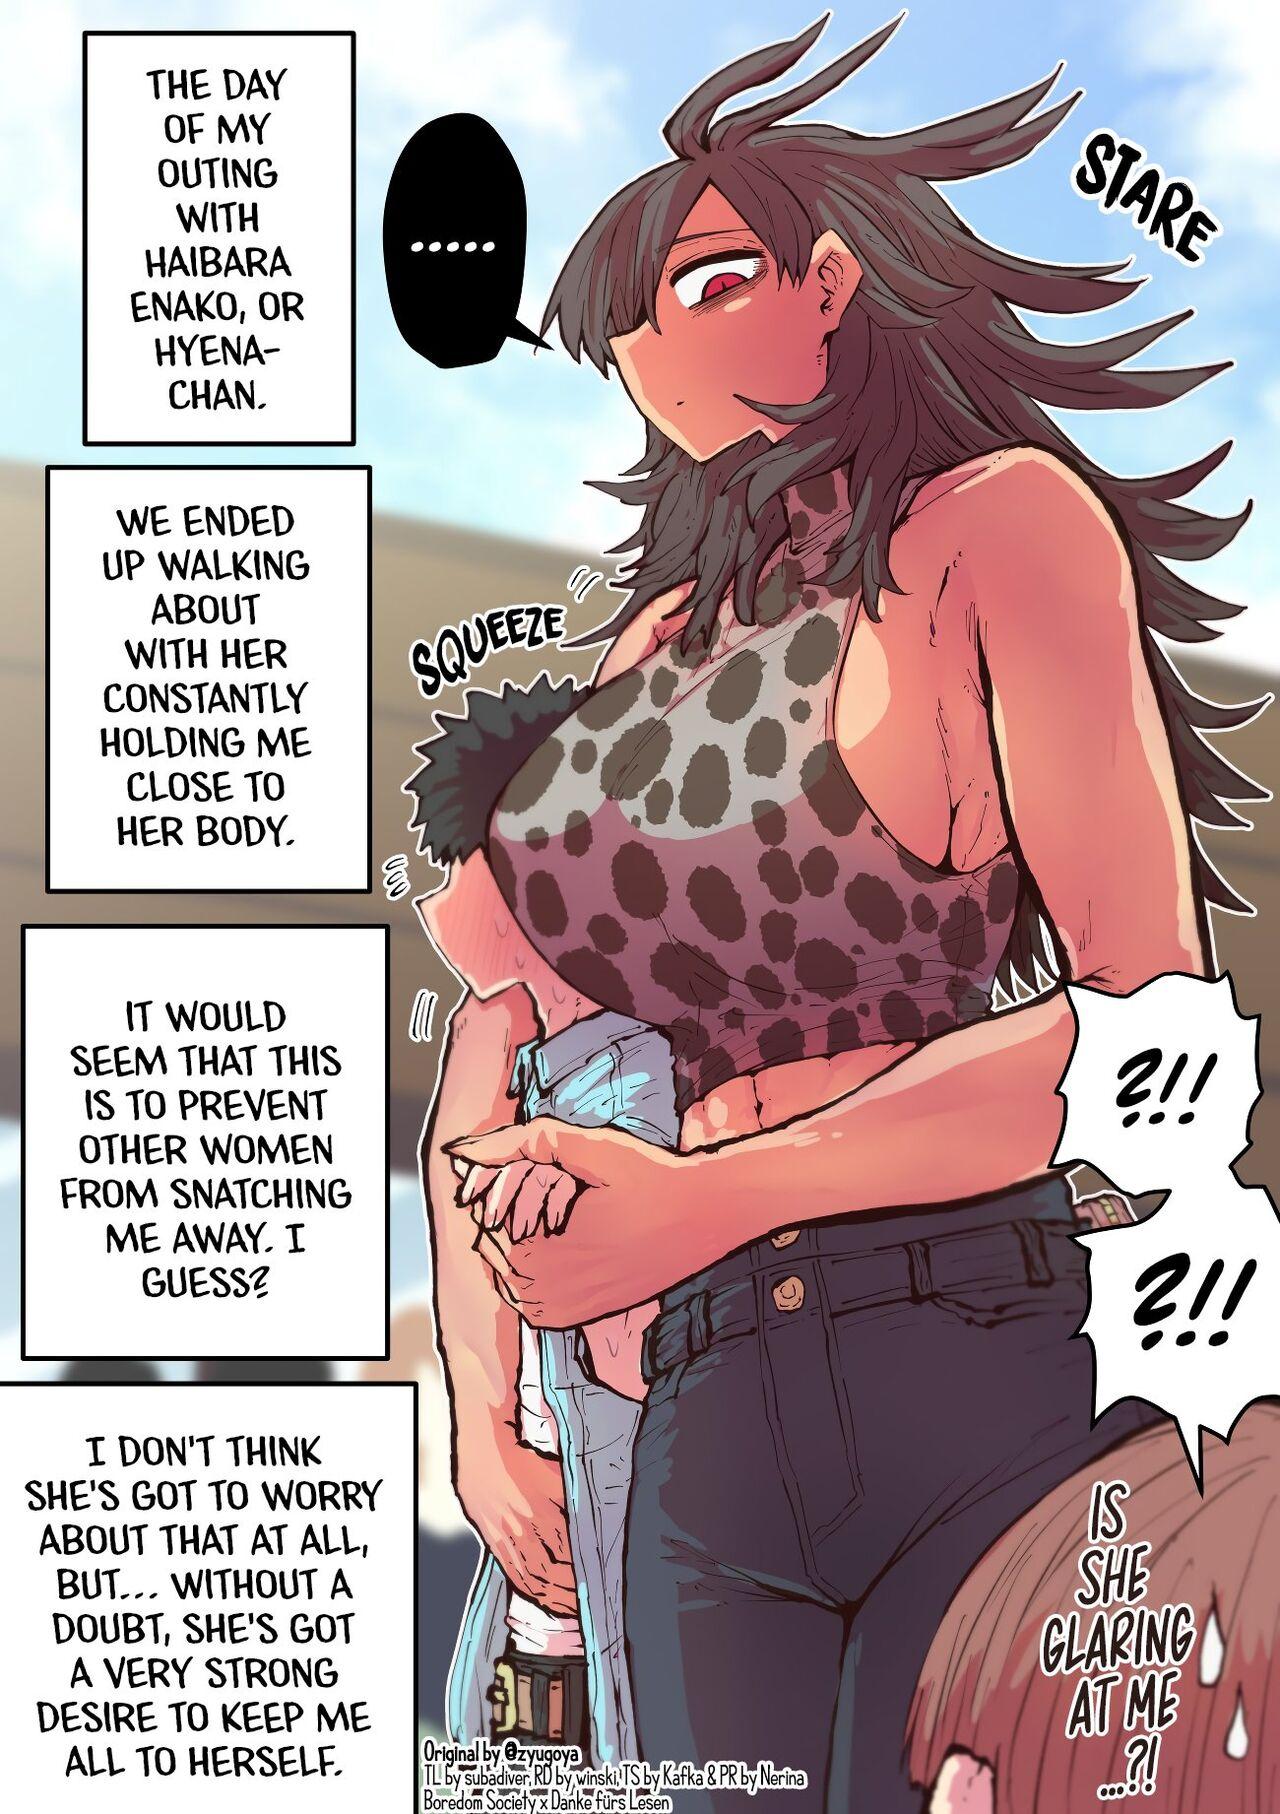 Uniform Being Targeted by Hyena-chan - Original Tinder - Page 8